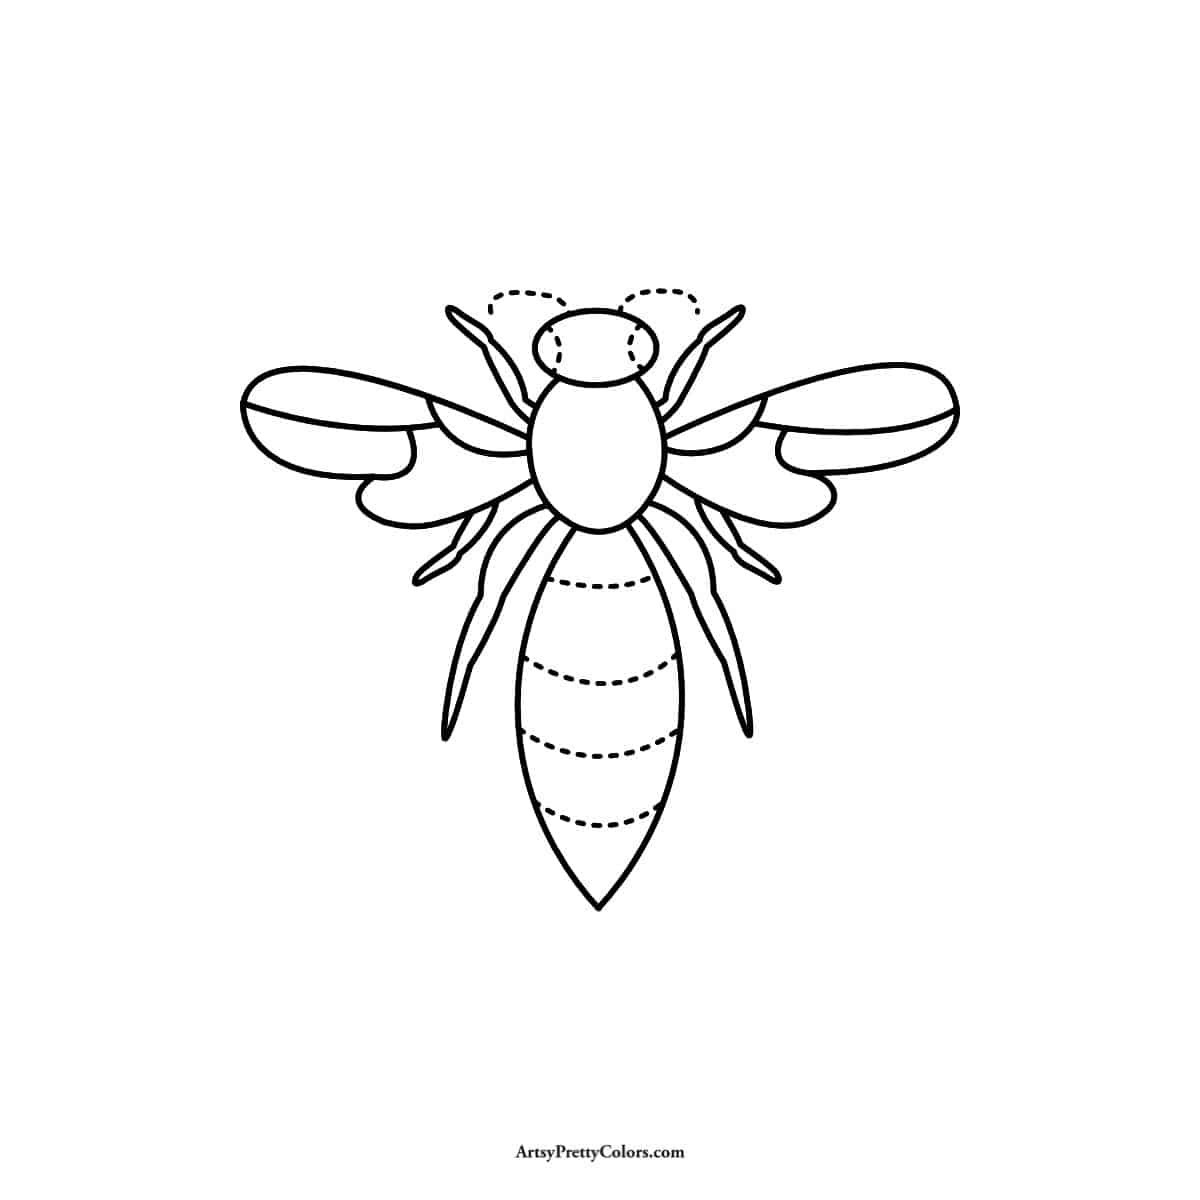 antennae and eyes step for wasp drawing